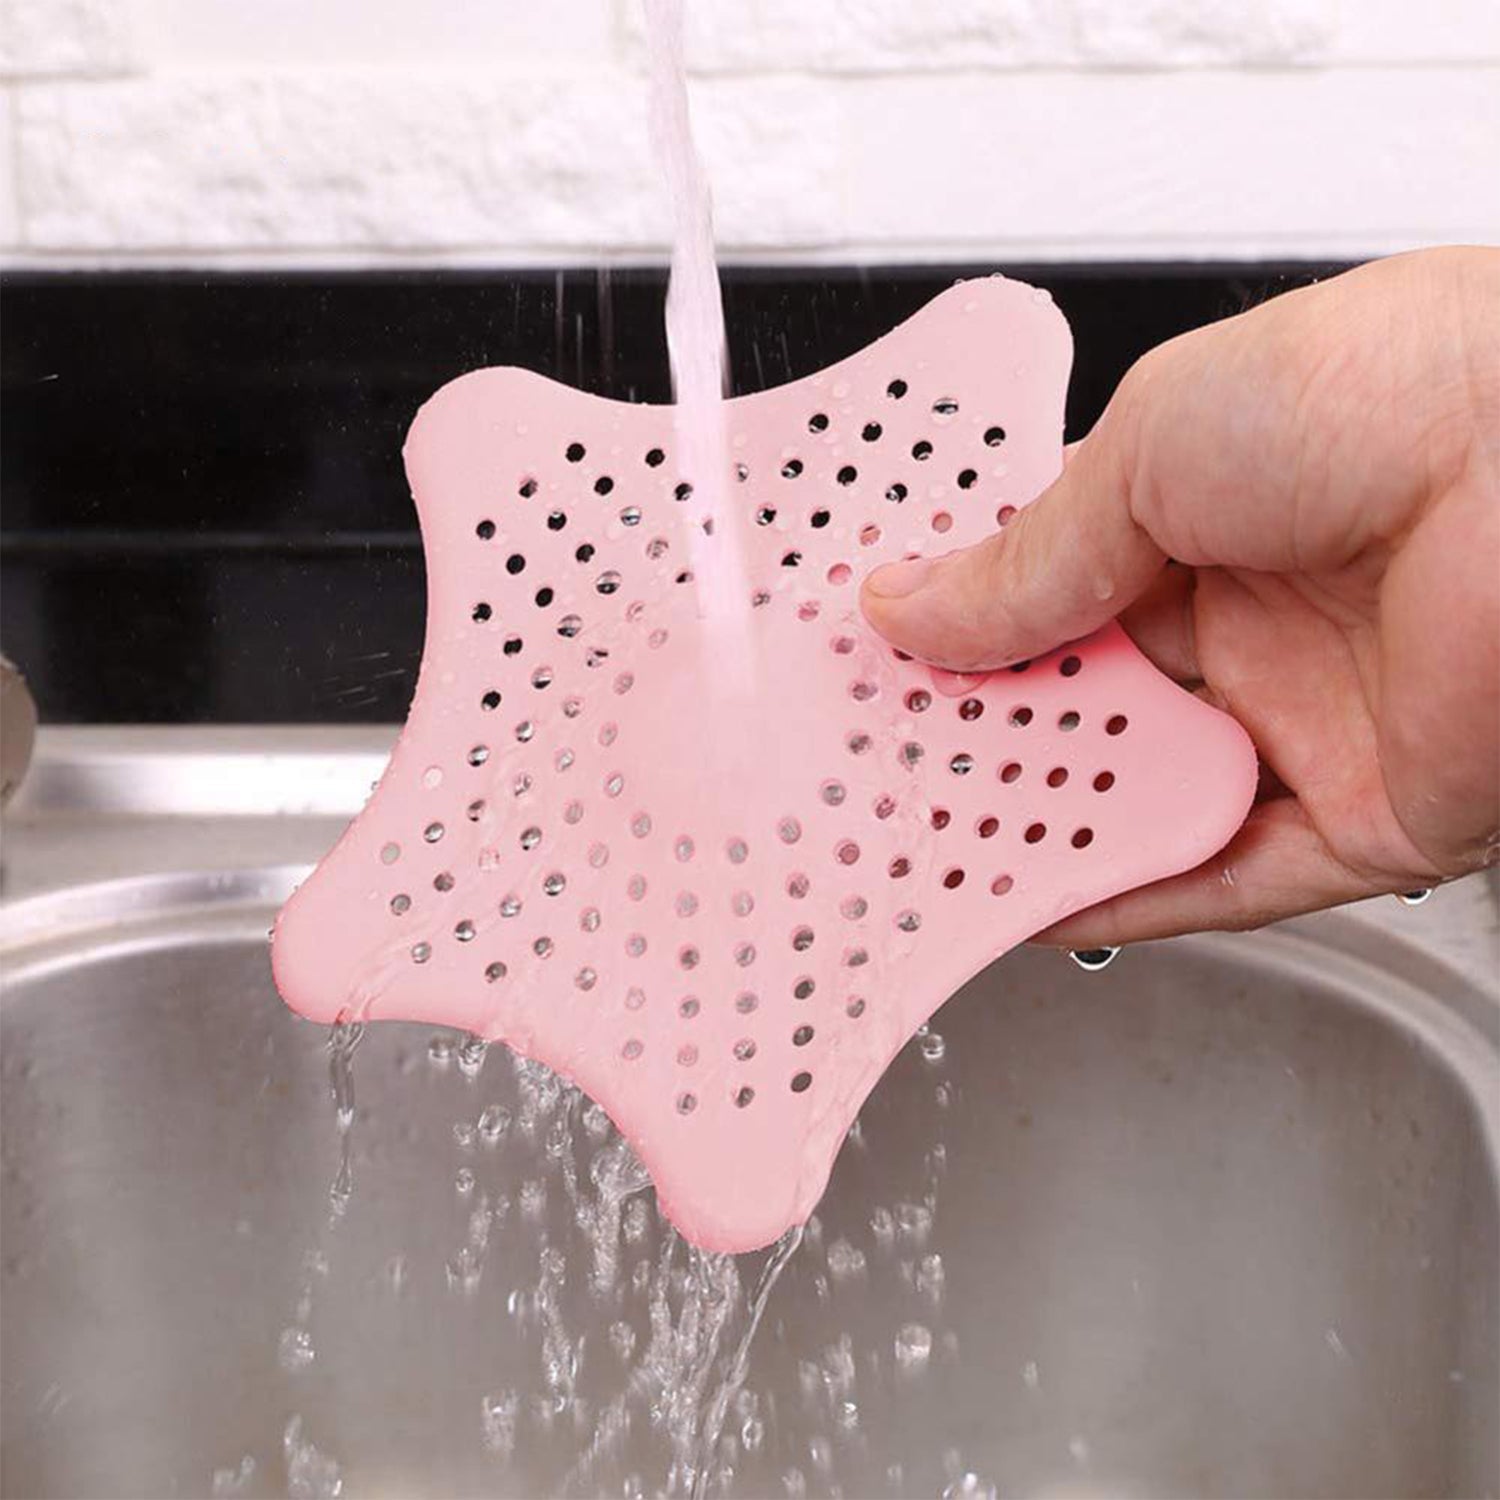 0829 A Star Sink Strainer used in all kinds of place like house kitchens for using it as a sink strainer purposes.